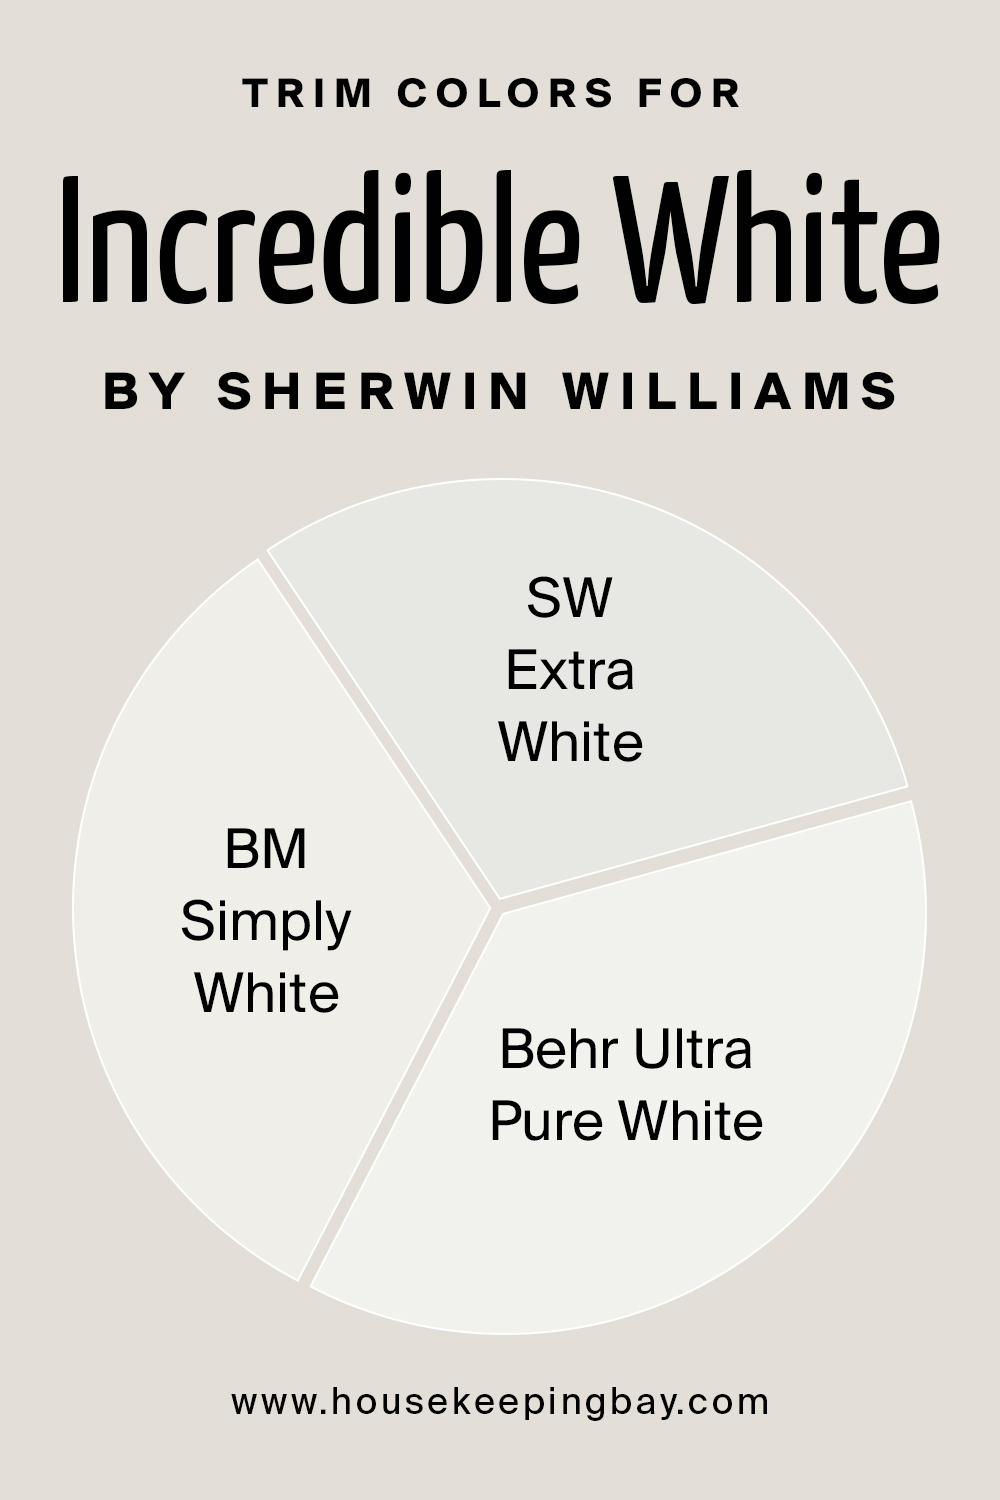 Trim Colors for Incredible White by Sherwin Williams